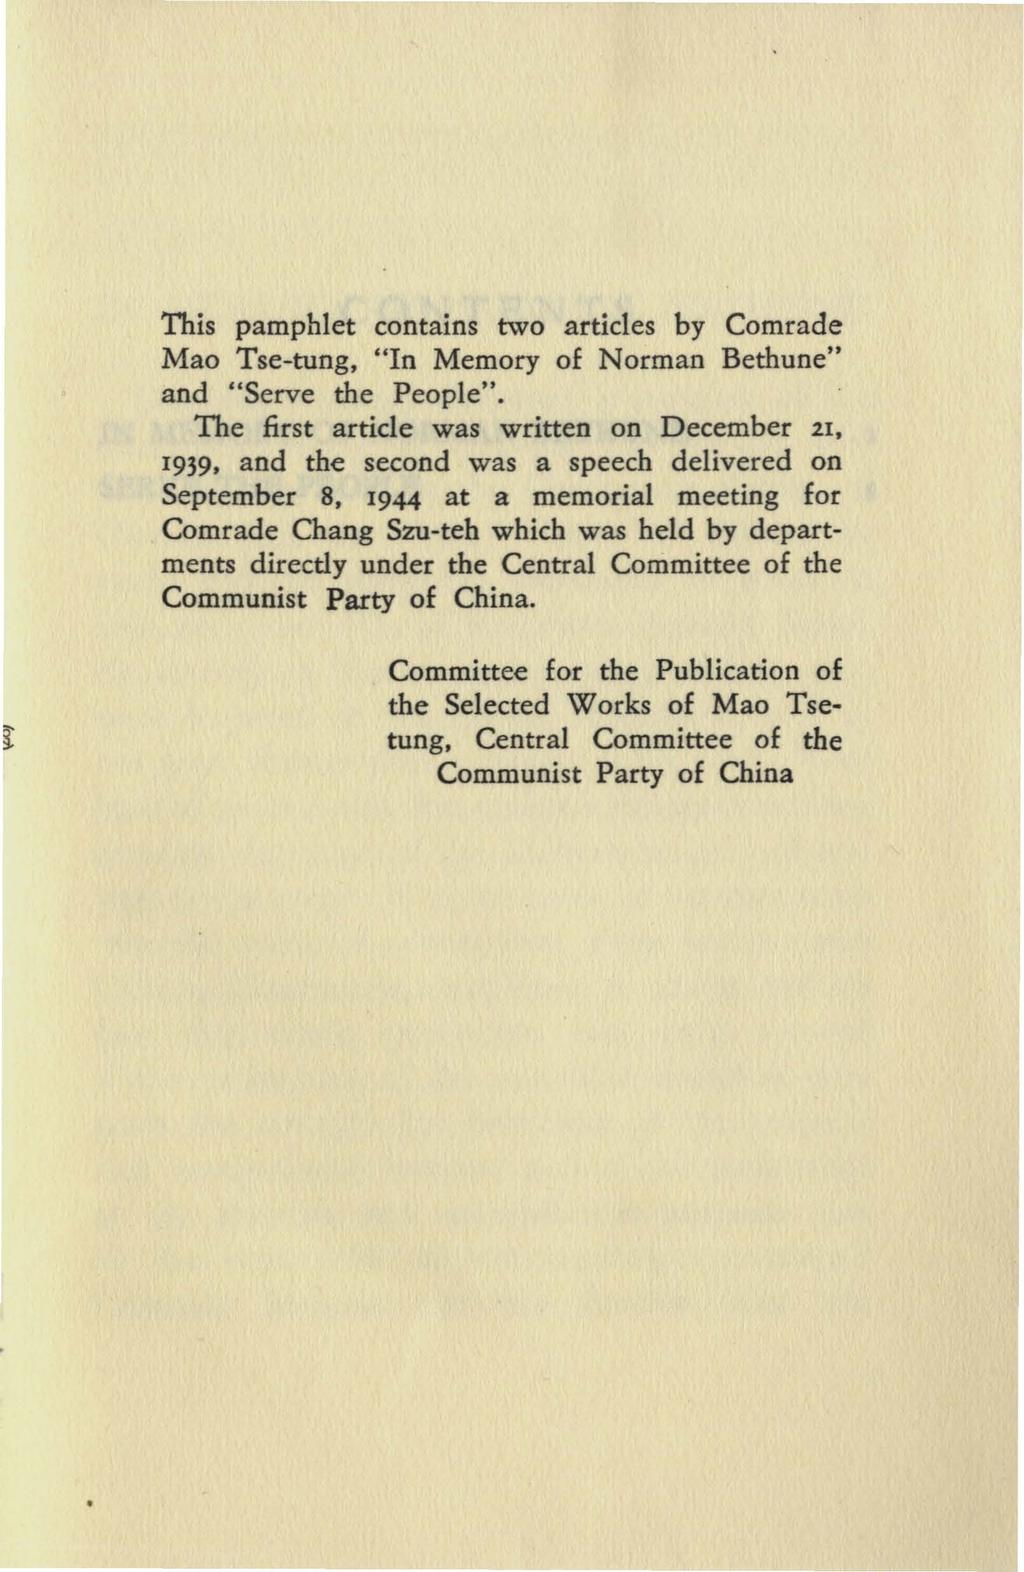 This pamphlet contains two articles by Comrade Mao Tse-tung, "In Memory of Norman Bethune" and "Serve the People". The first article was written on December 2.